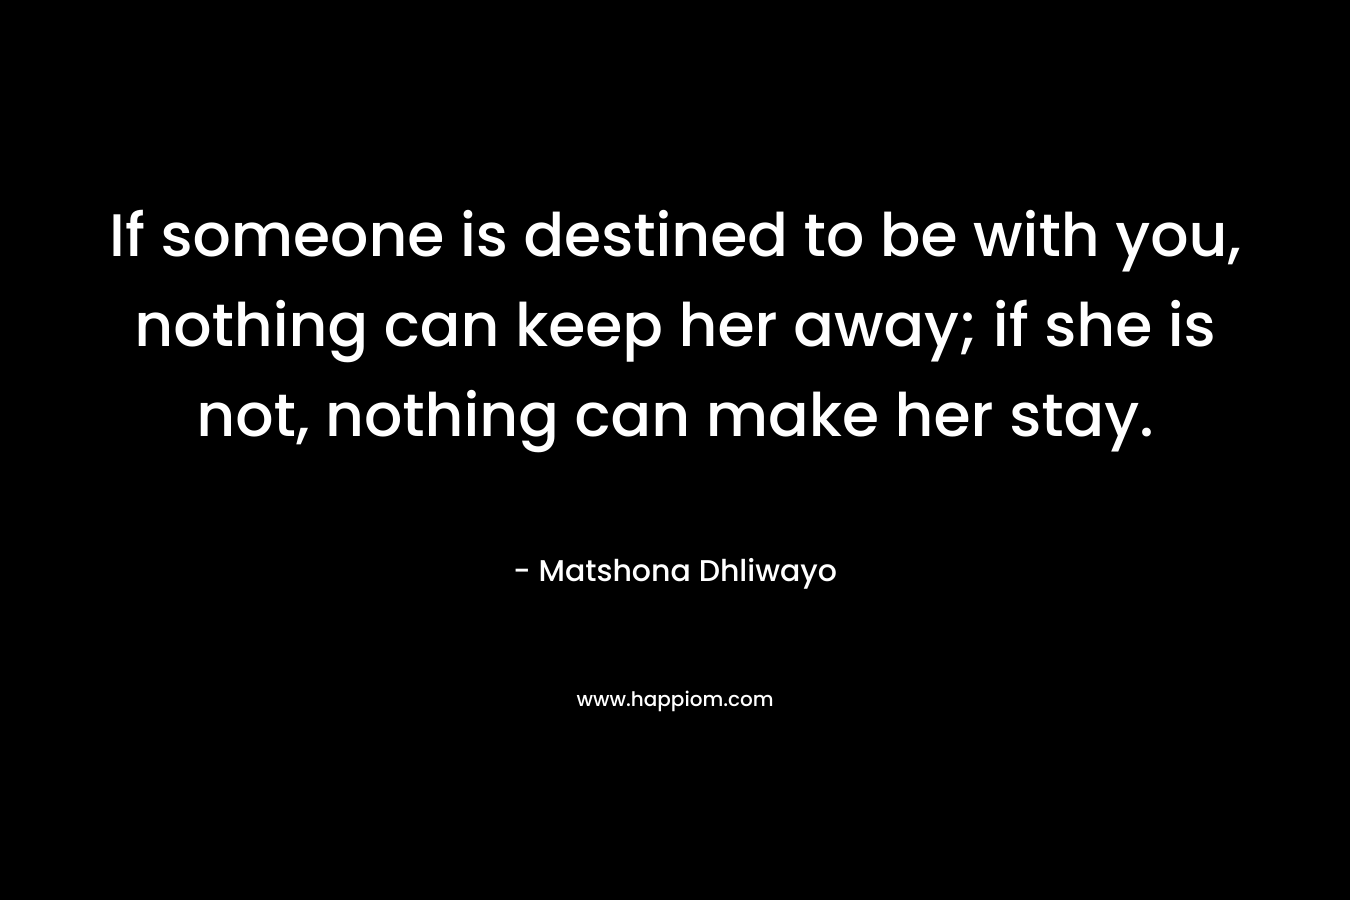 If someone is destined to be with you, nothing can keep her away; if she is not, nothing can make her stay.